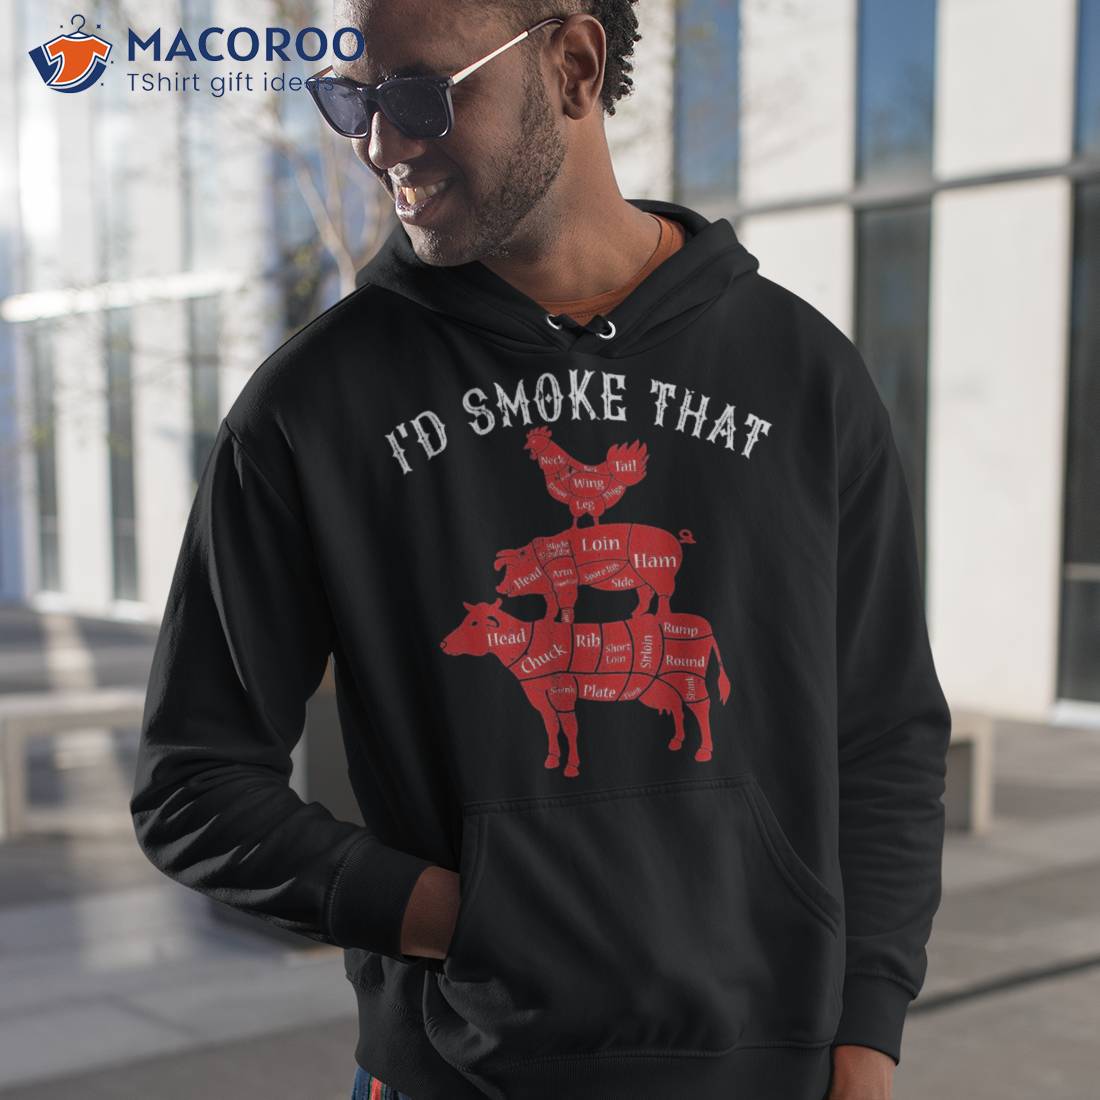 https://images.macoroo.com/wp-content/uploads/2023/06/i-d-smoke-that-barbecue-grilling-bbq-smoker-gift-for-dad-shirt-hoodie-1.jpg